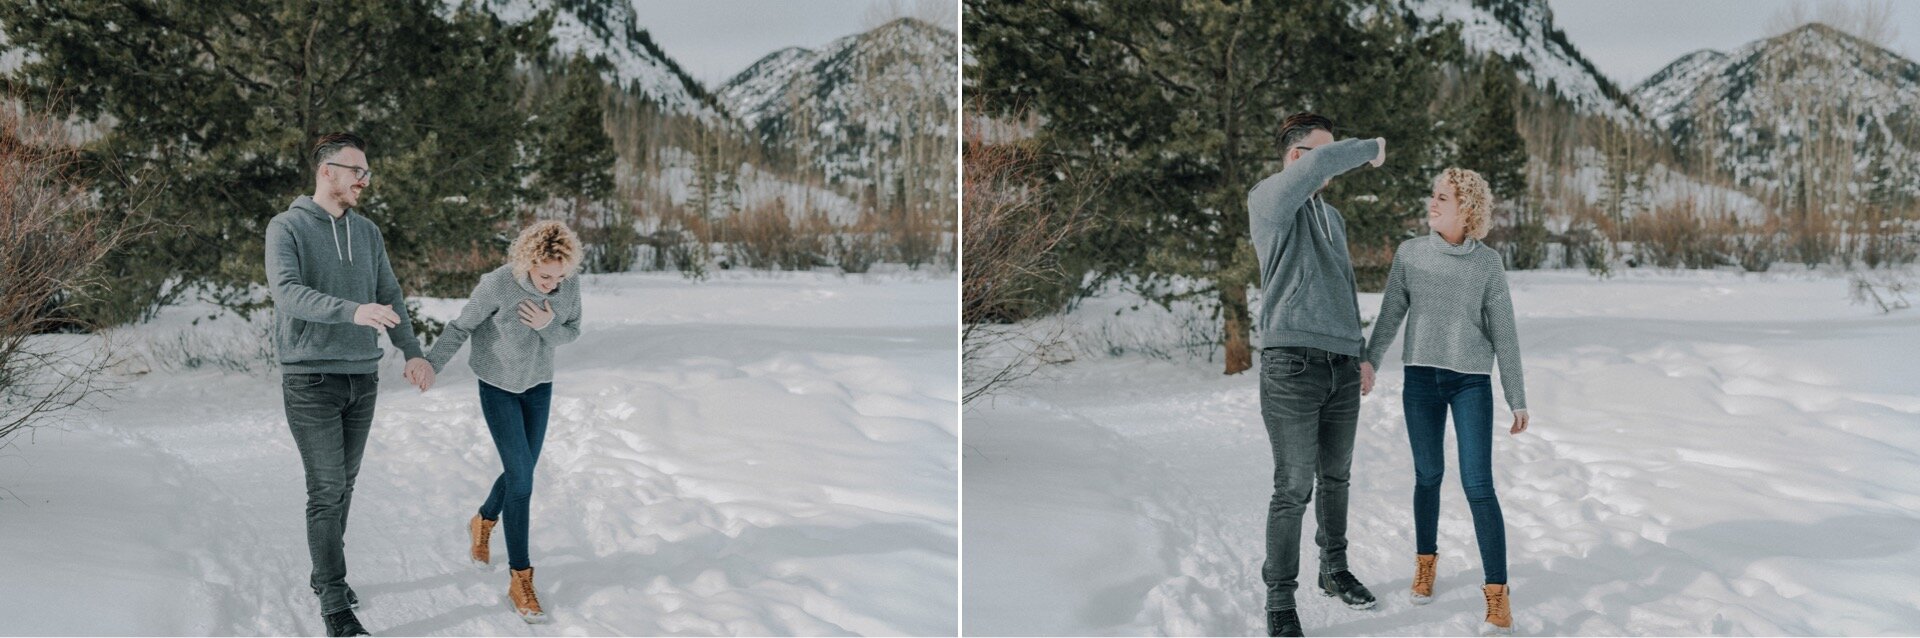 04_Kelsey&Taylor014_Kelsey&Taylor013_frisco_Photographer_engagement_Co_Hannah_Session_Photography_Minnesota_Snowy_Colorado_adventure_ampe_Mountain_engaged.jpg